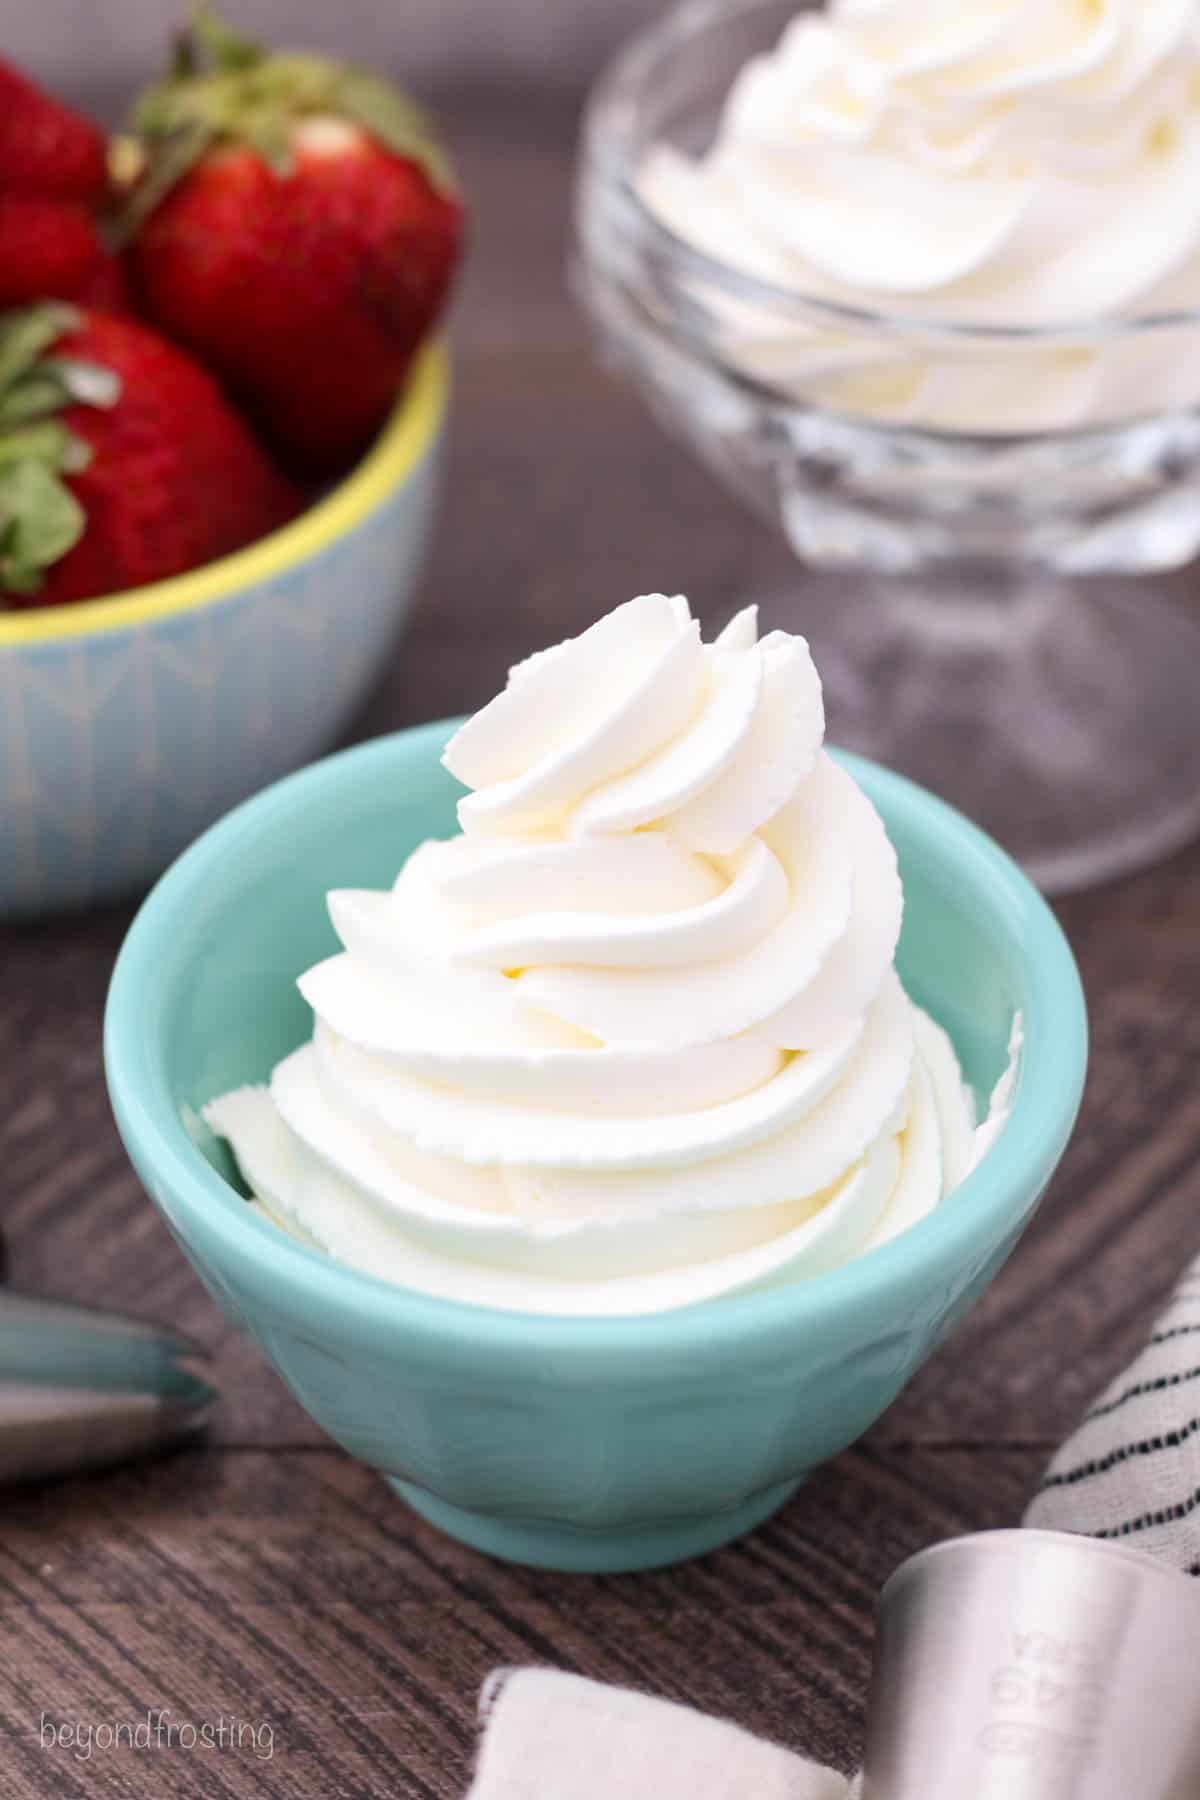 Overhead view of a swirl of whipped cream piped into a teal bowl.